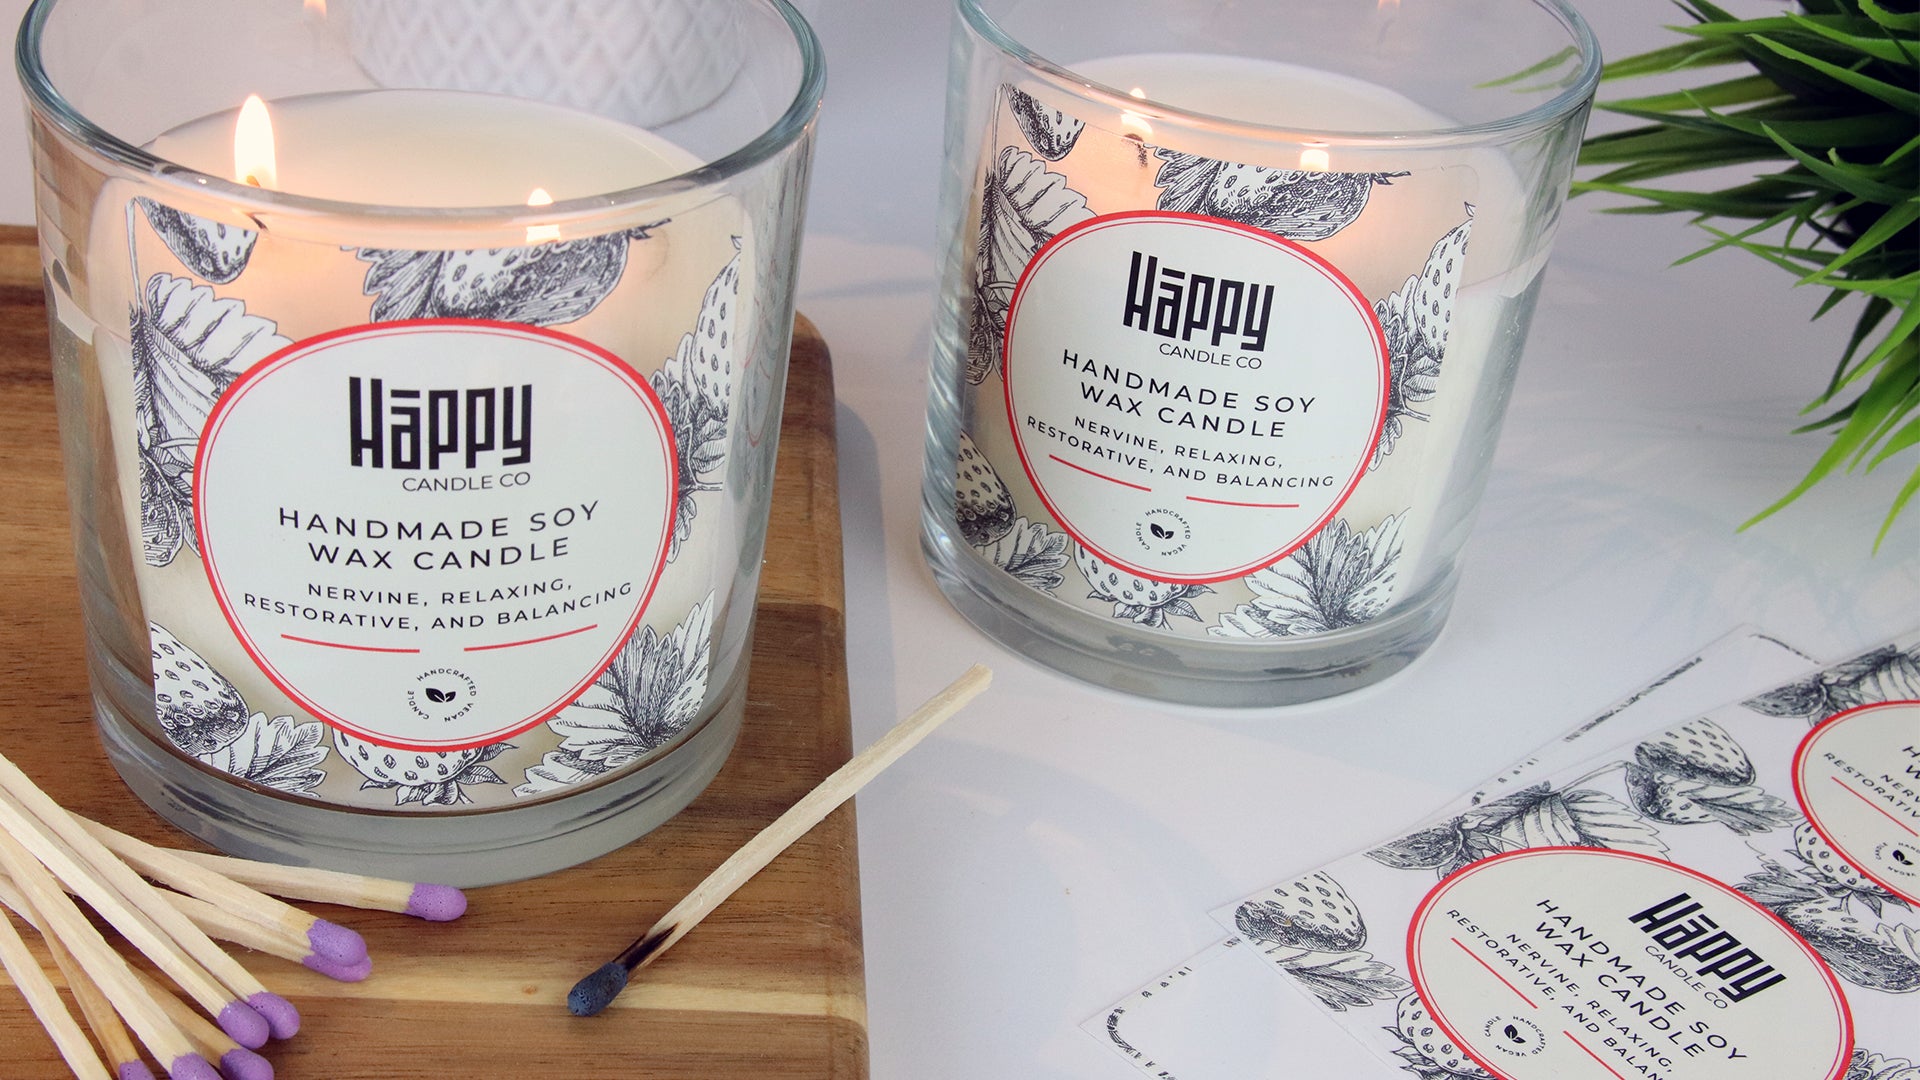 Clear eco friendly compostable labels with flower design applied to handmade soy wax candles